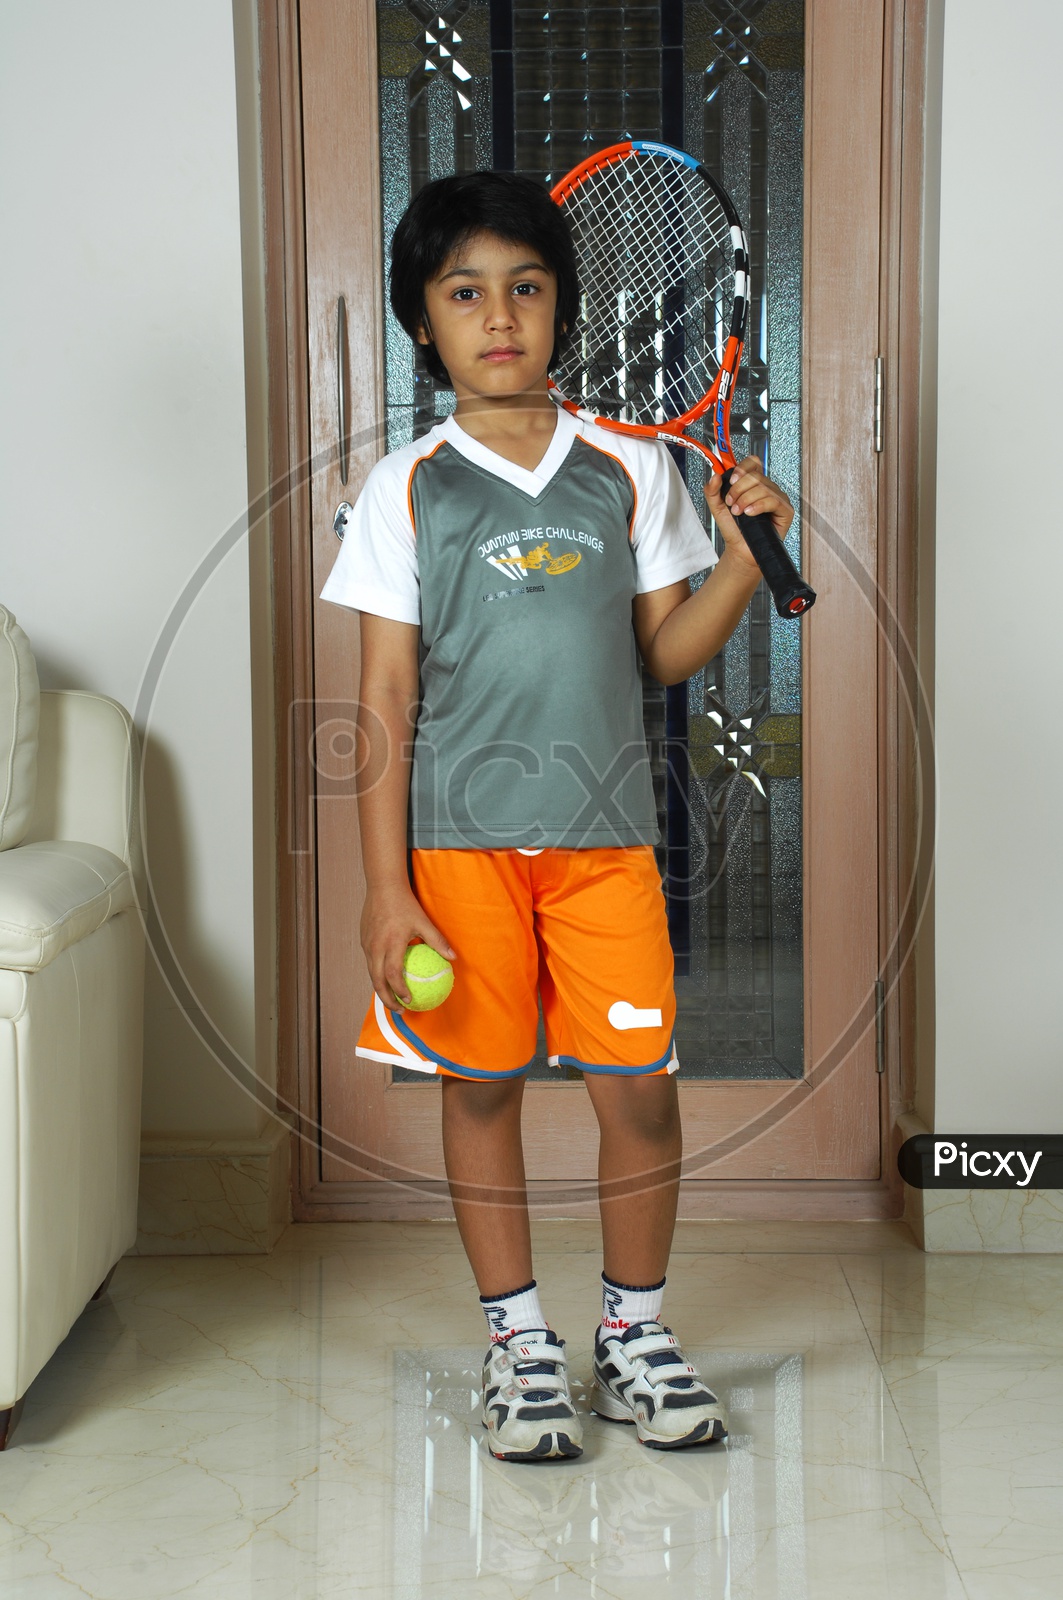 Indian boy with sportswear holding a tennis racket and ball